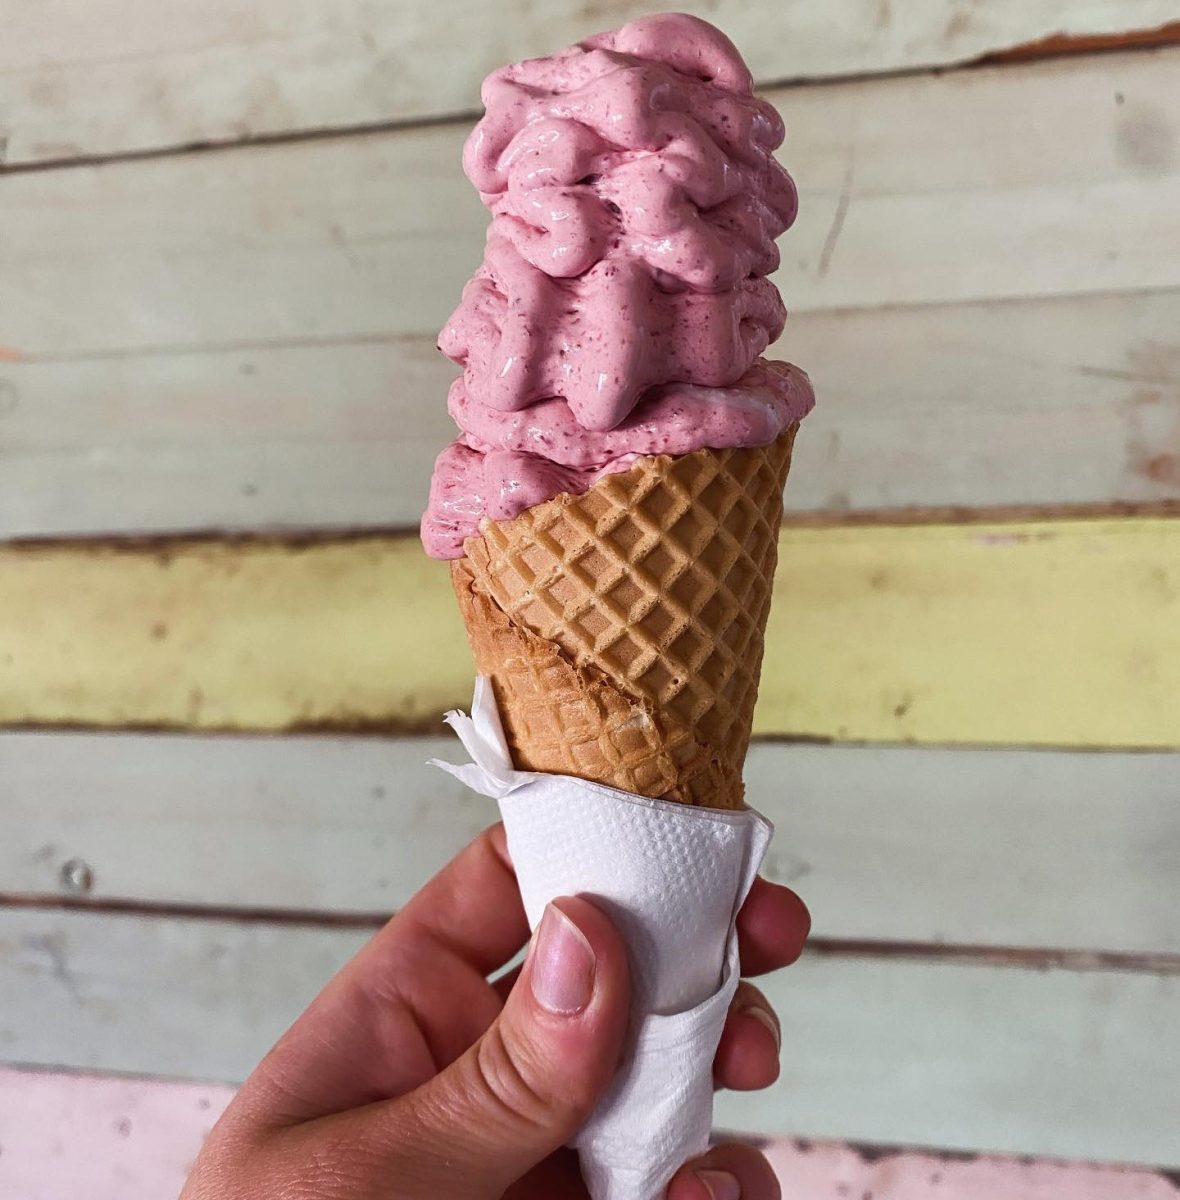 A hand holding a cherry ice-cream in cone